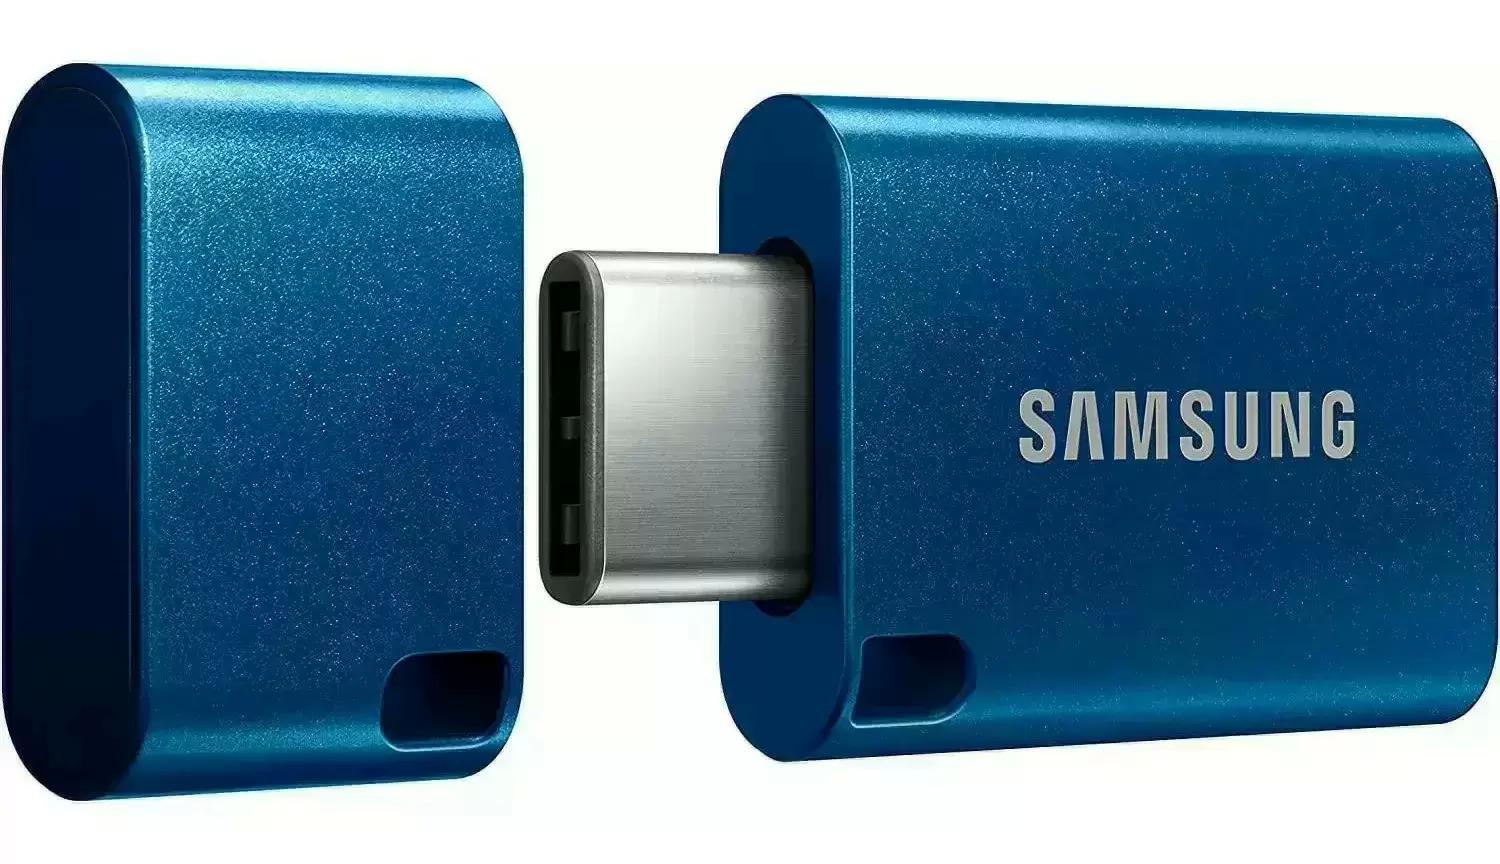 256GB Samsung USB Type-C Flash Drive for $23.99 Shipped